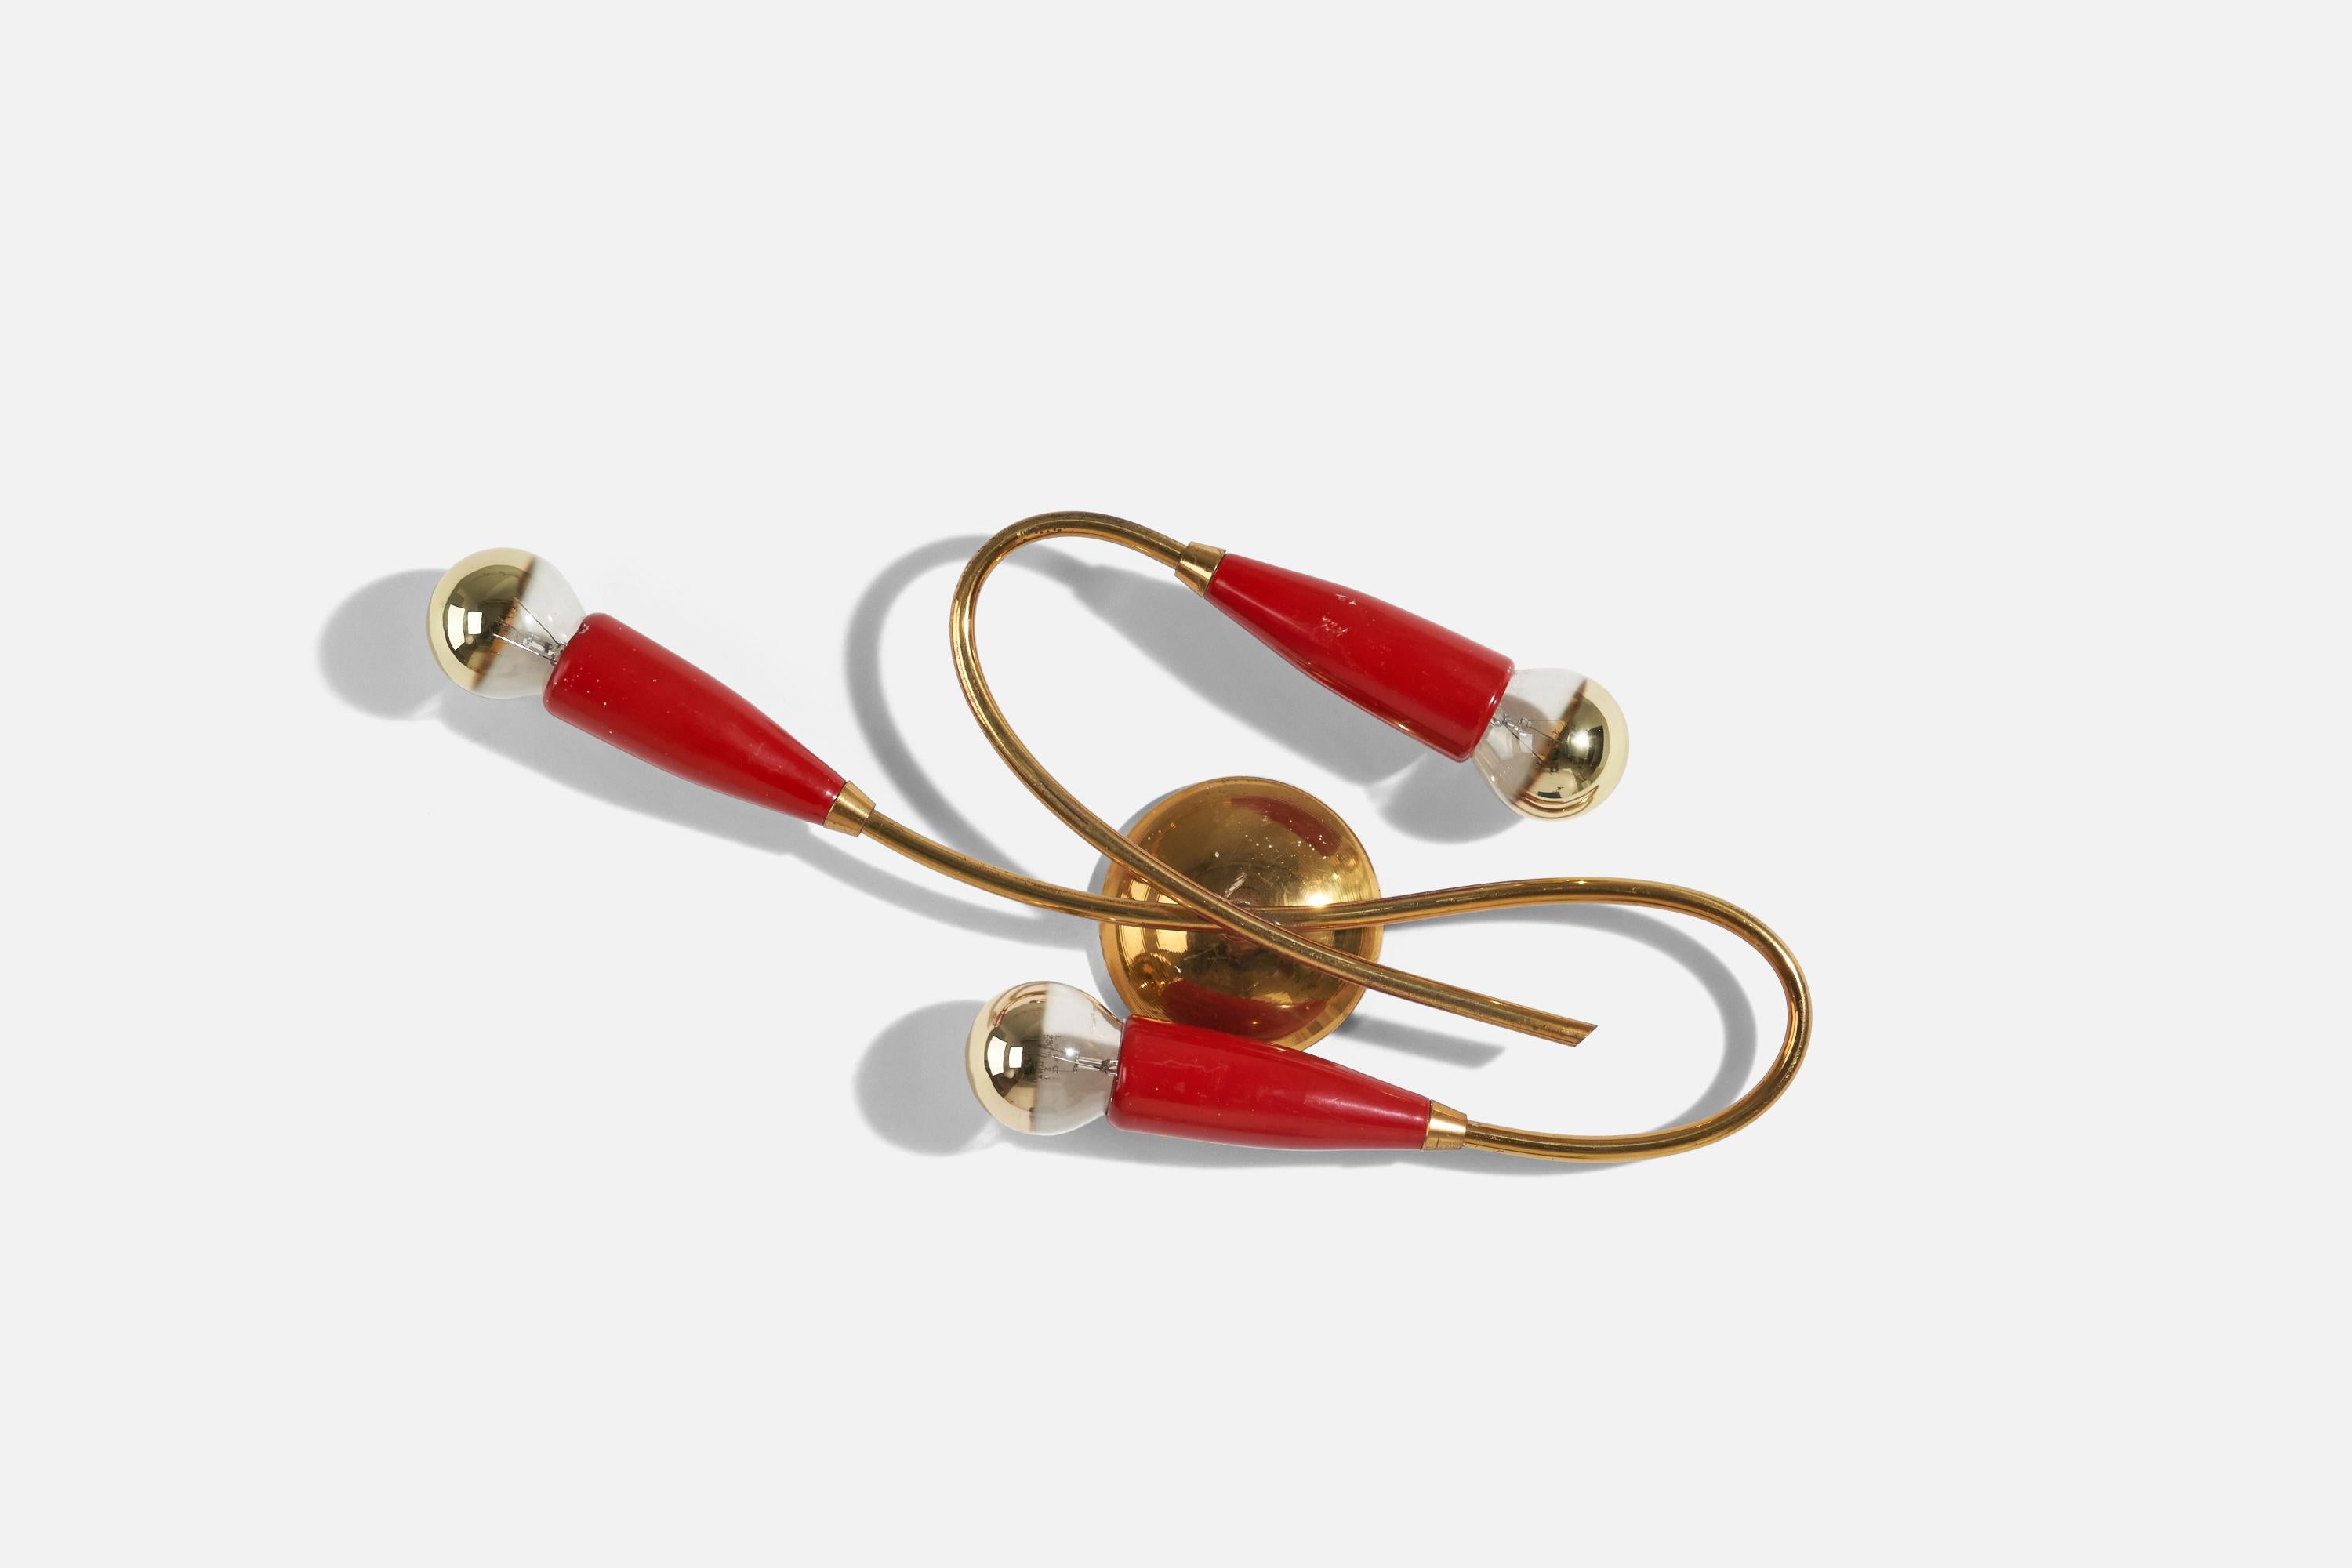 A brass and red-lacquered metal sconce/ wall light designed and produced by an Italian designer, Italy, 1950s.

Socket takes E-14 bulb.

There is no maximum wattage stated on the fixture.

Dimensions of Back Plate (inches) : 3.38 x 3.38 x 0.92